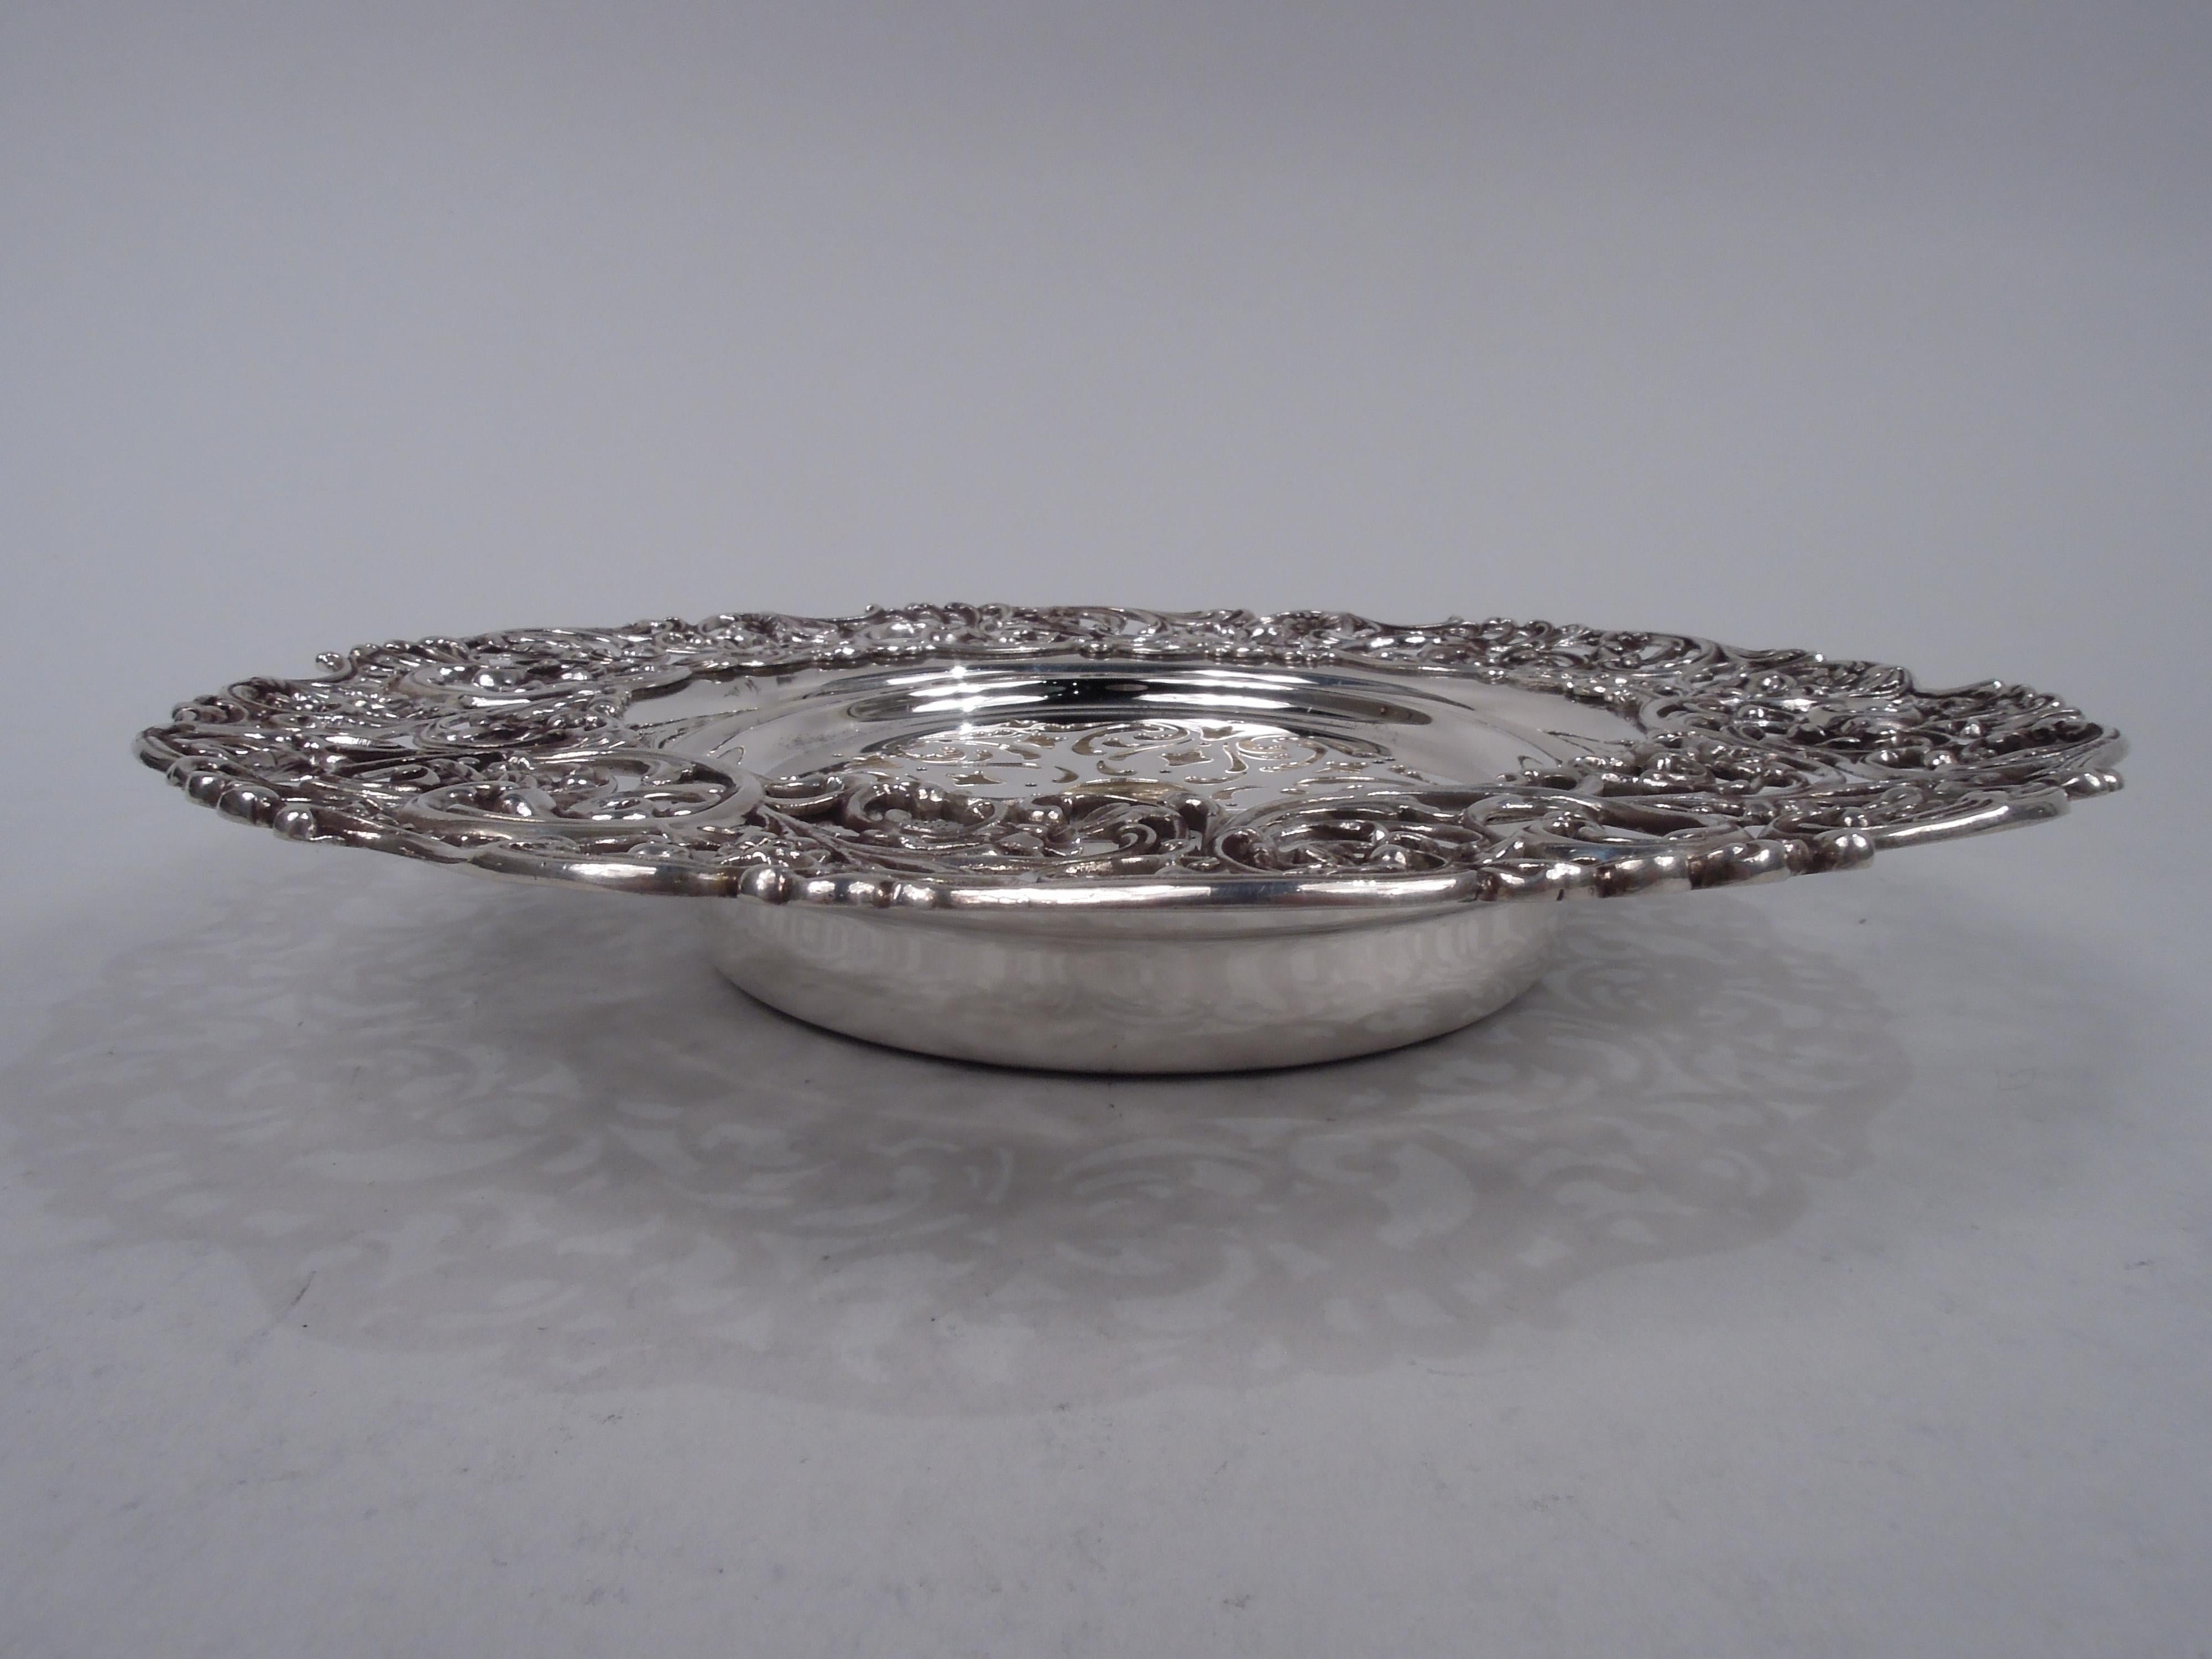 Edwardian sterling silver butter dish, ca 1900. Round and deep well. Applied wide and cast rim with open leafing scrollwork and flowers. Liner has ornamental piercing. Fully marked including stamp for Roger Williams, a Providence maker that merged